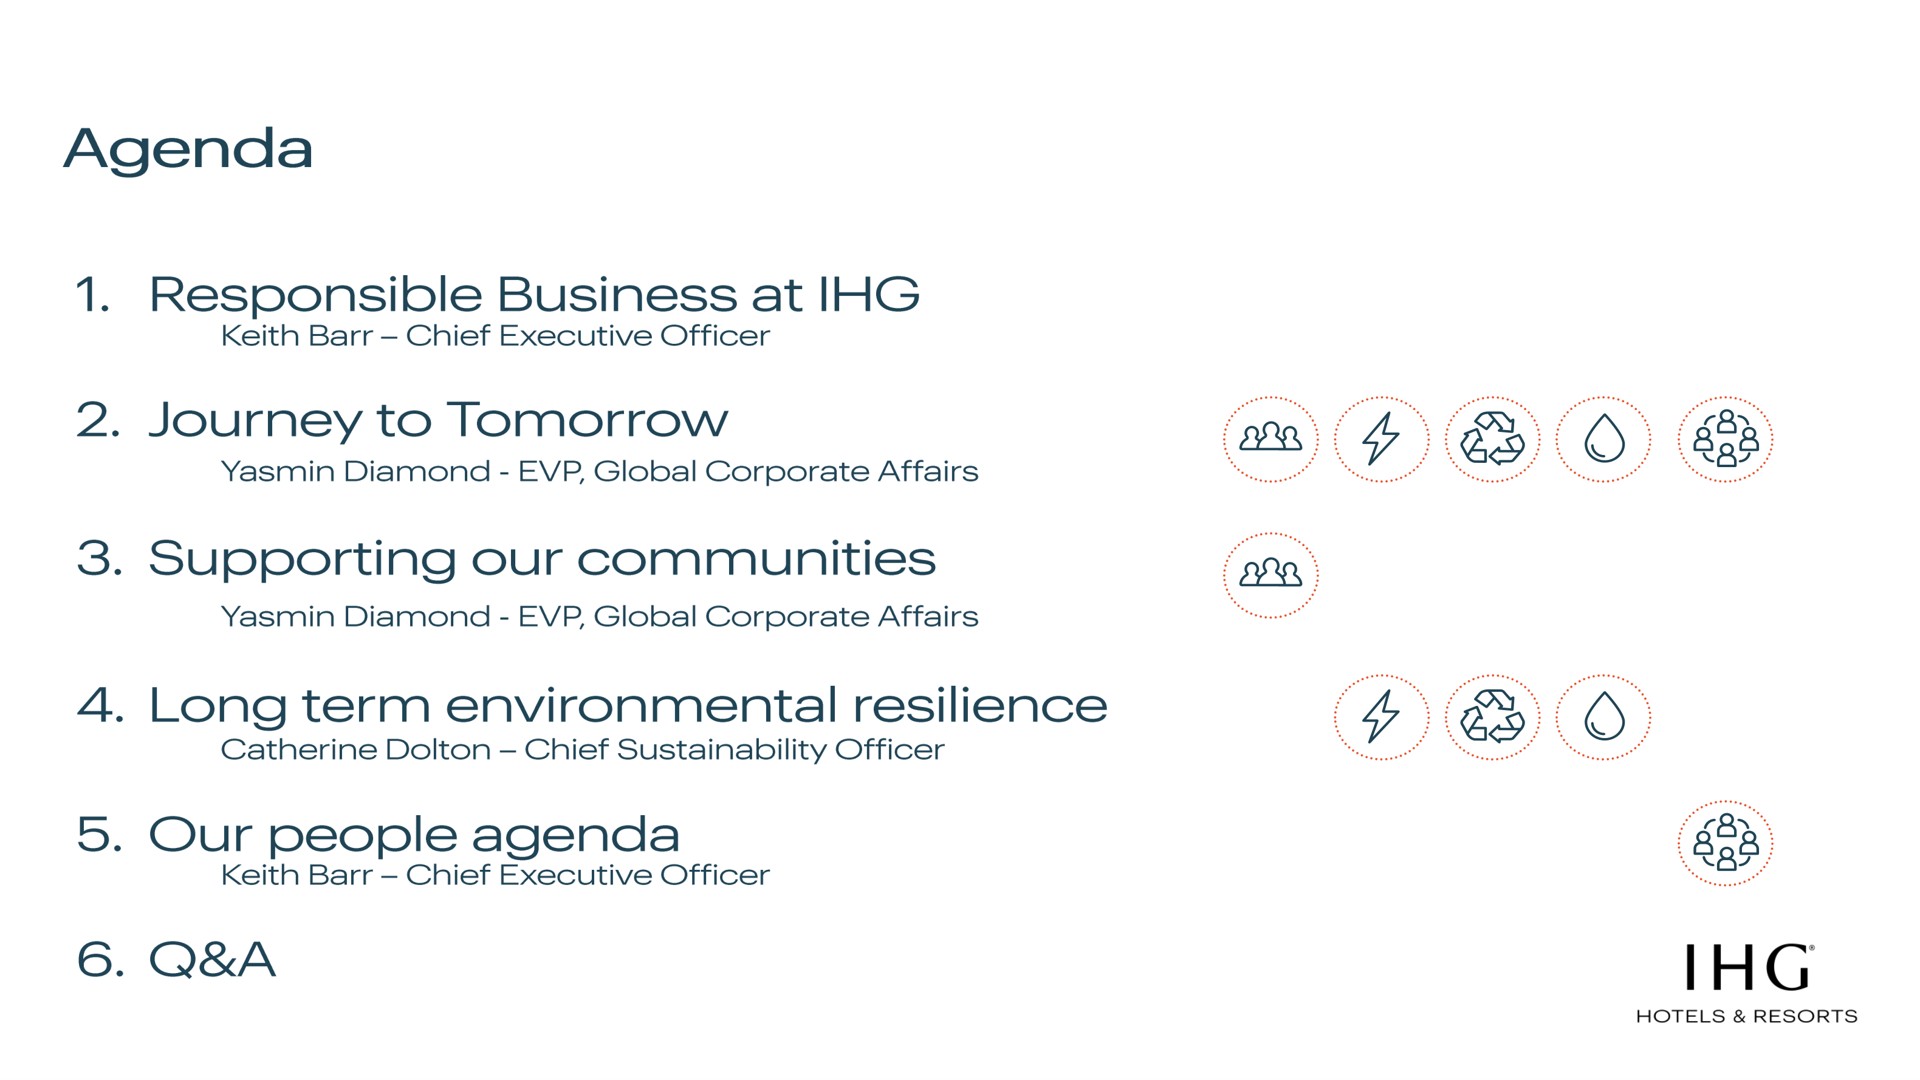 agenda responsible business at journey to tomorrow so by supporting our communities long term environmental resilience is our people agenda a | IHG Hotels